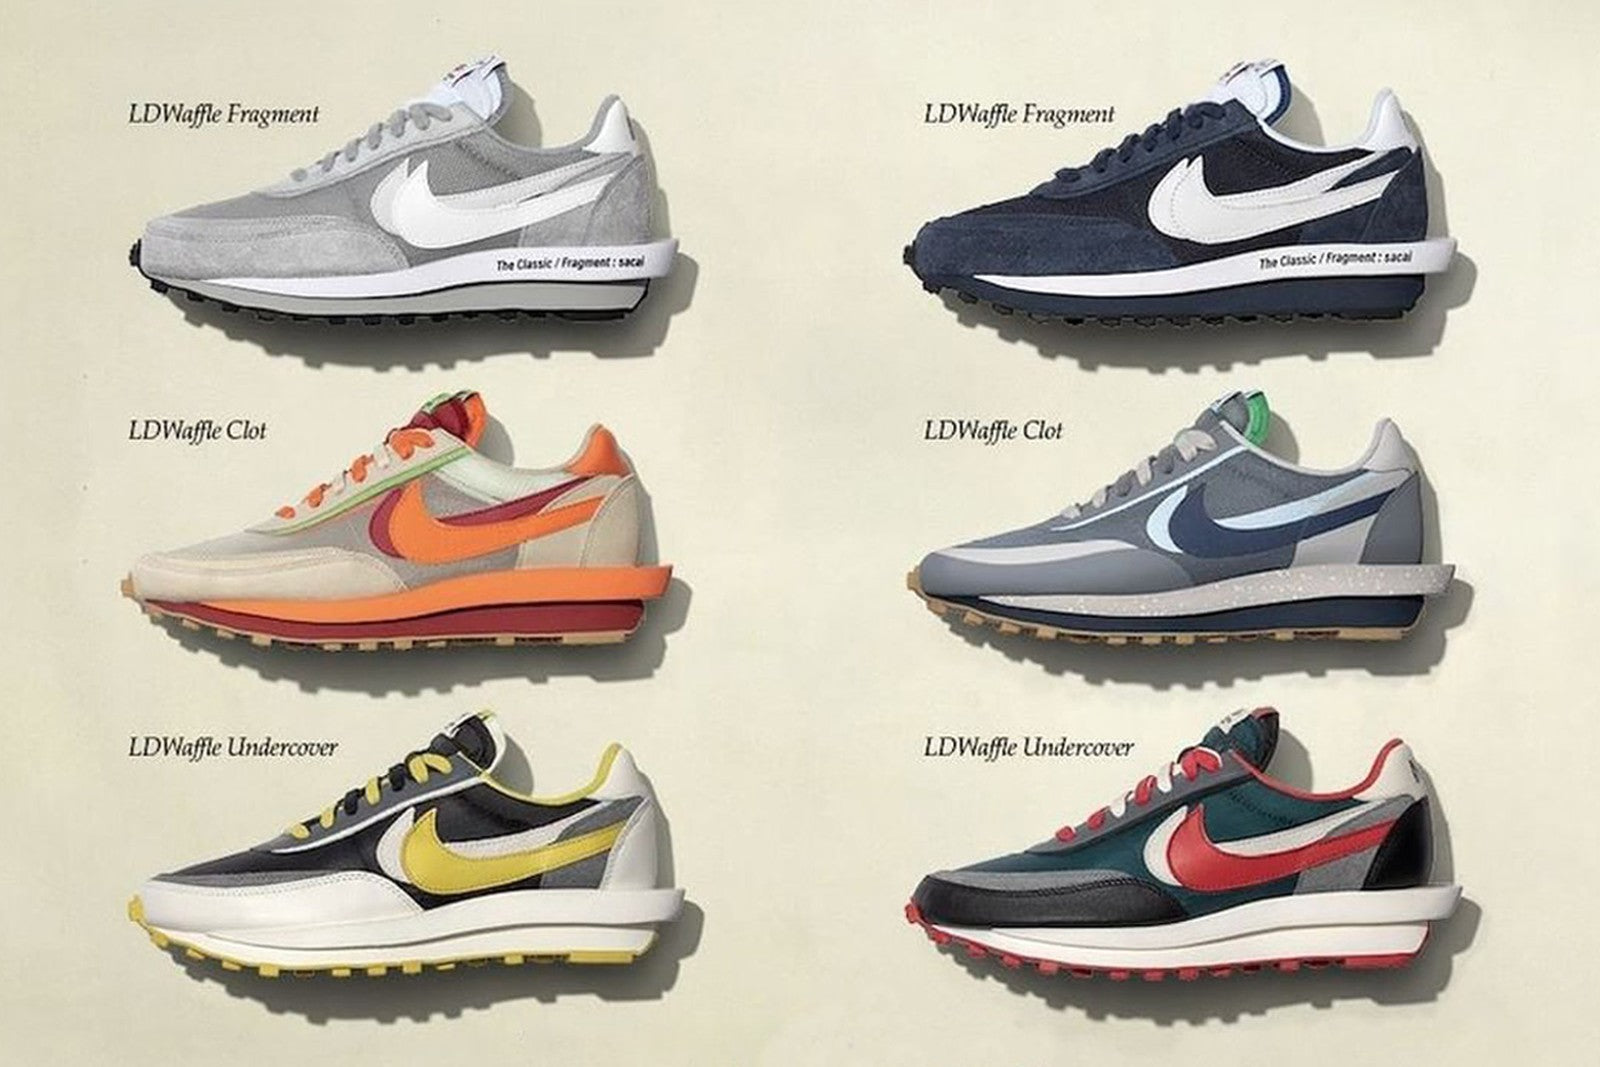 Sacai x Nike tap up CLOT and Undercover for more LDWaffle Colourways